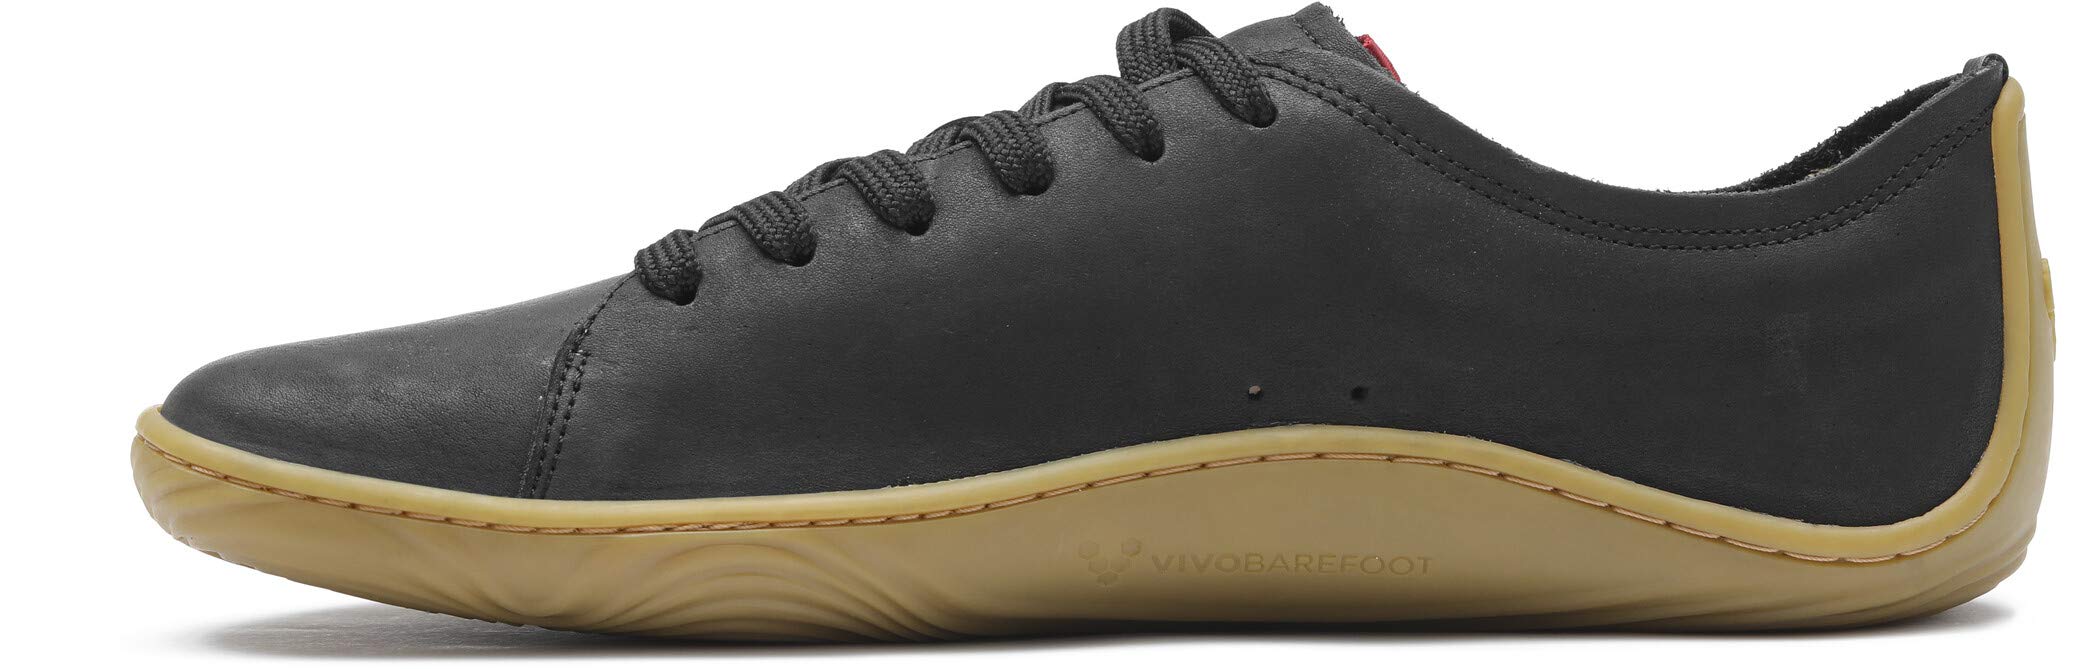 Vivobarefoot Addis, Mens Classic Leather lace-up with a Barefoot Feel & a Social Conscience